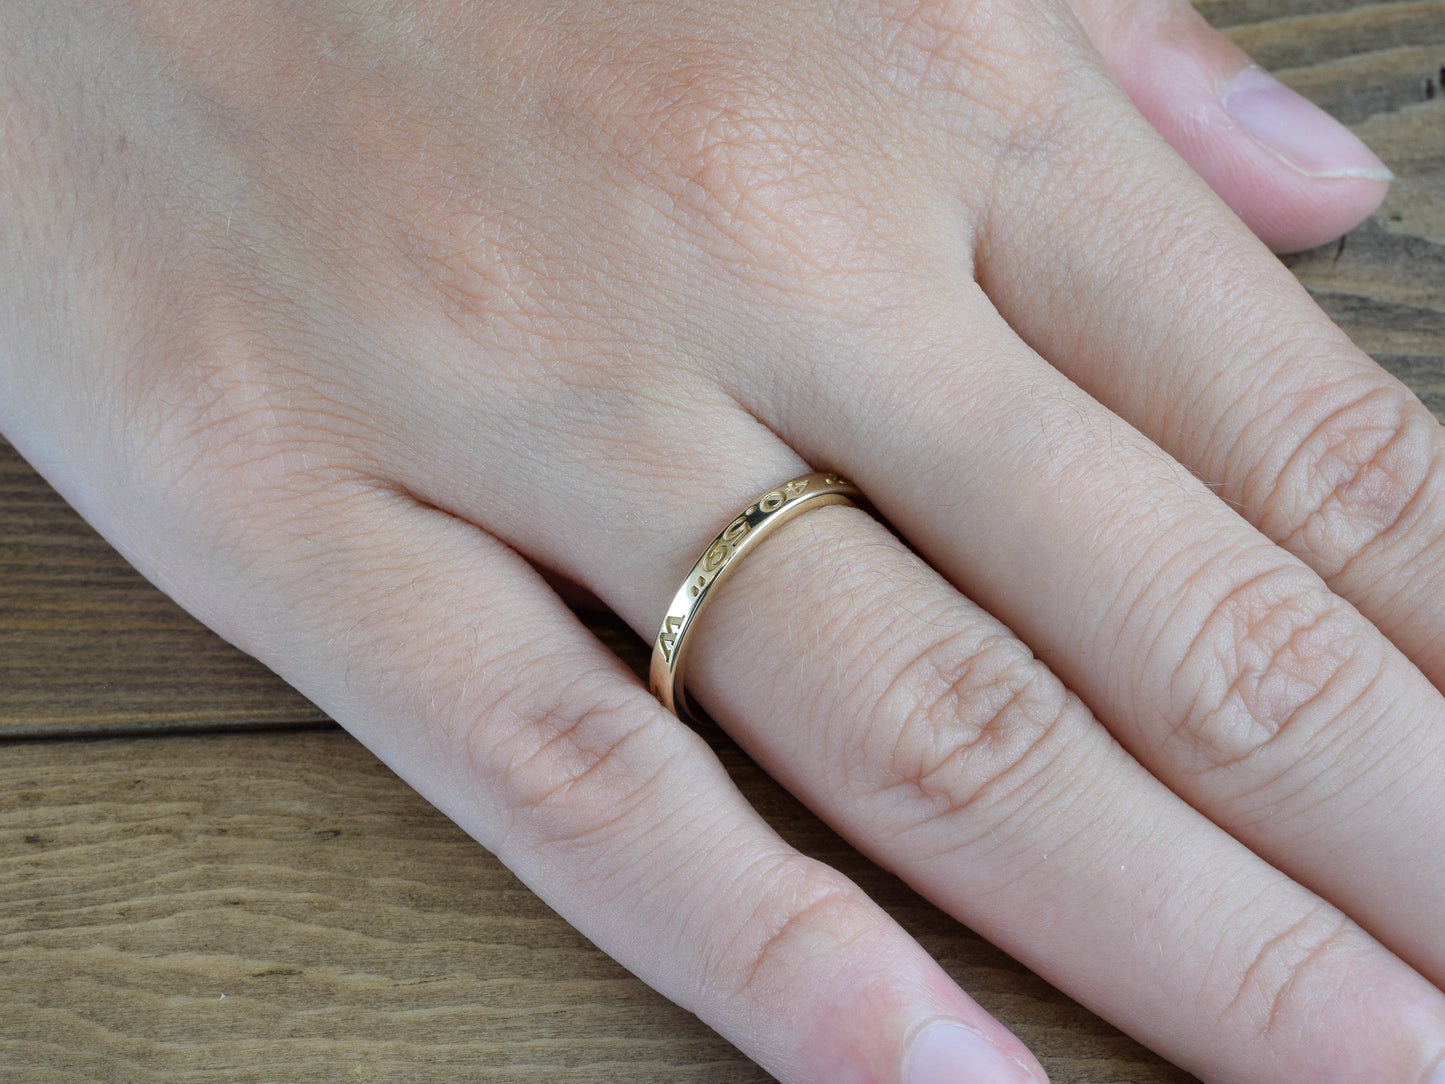 narrow custom engraved coordinates ring in yellow gold on finger